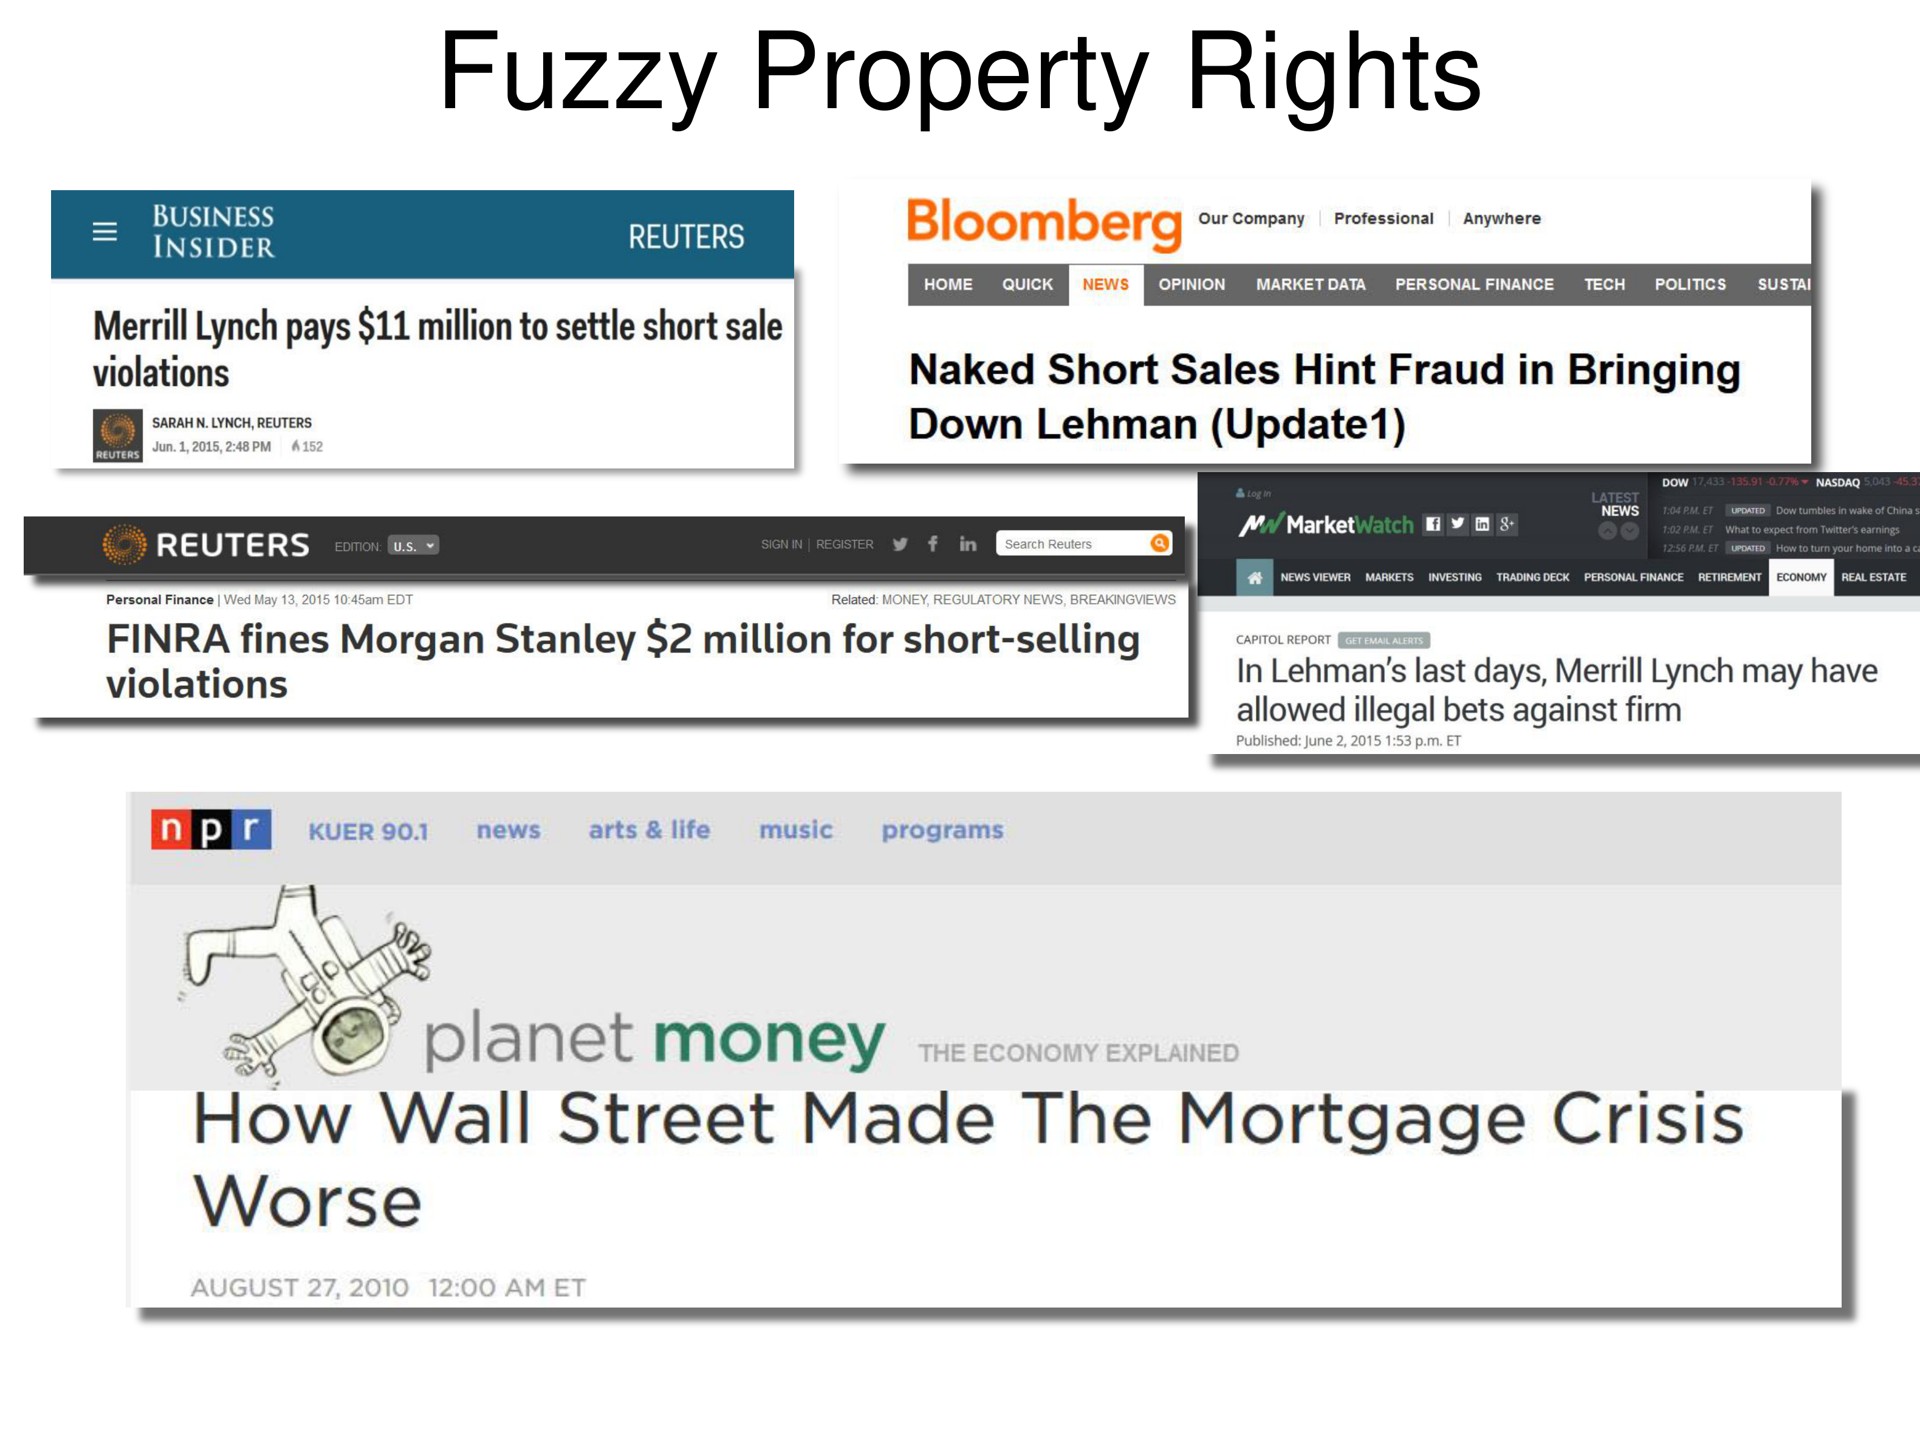 fuzzy property rights planet money few wall street made the mortgage crisis worse | Overstock